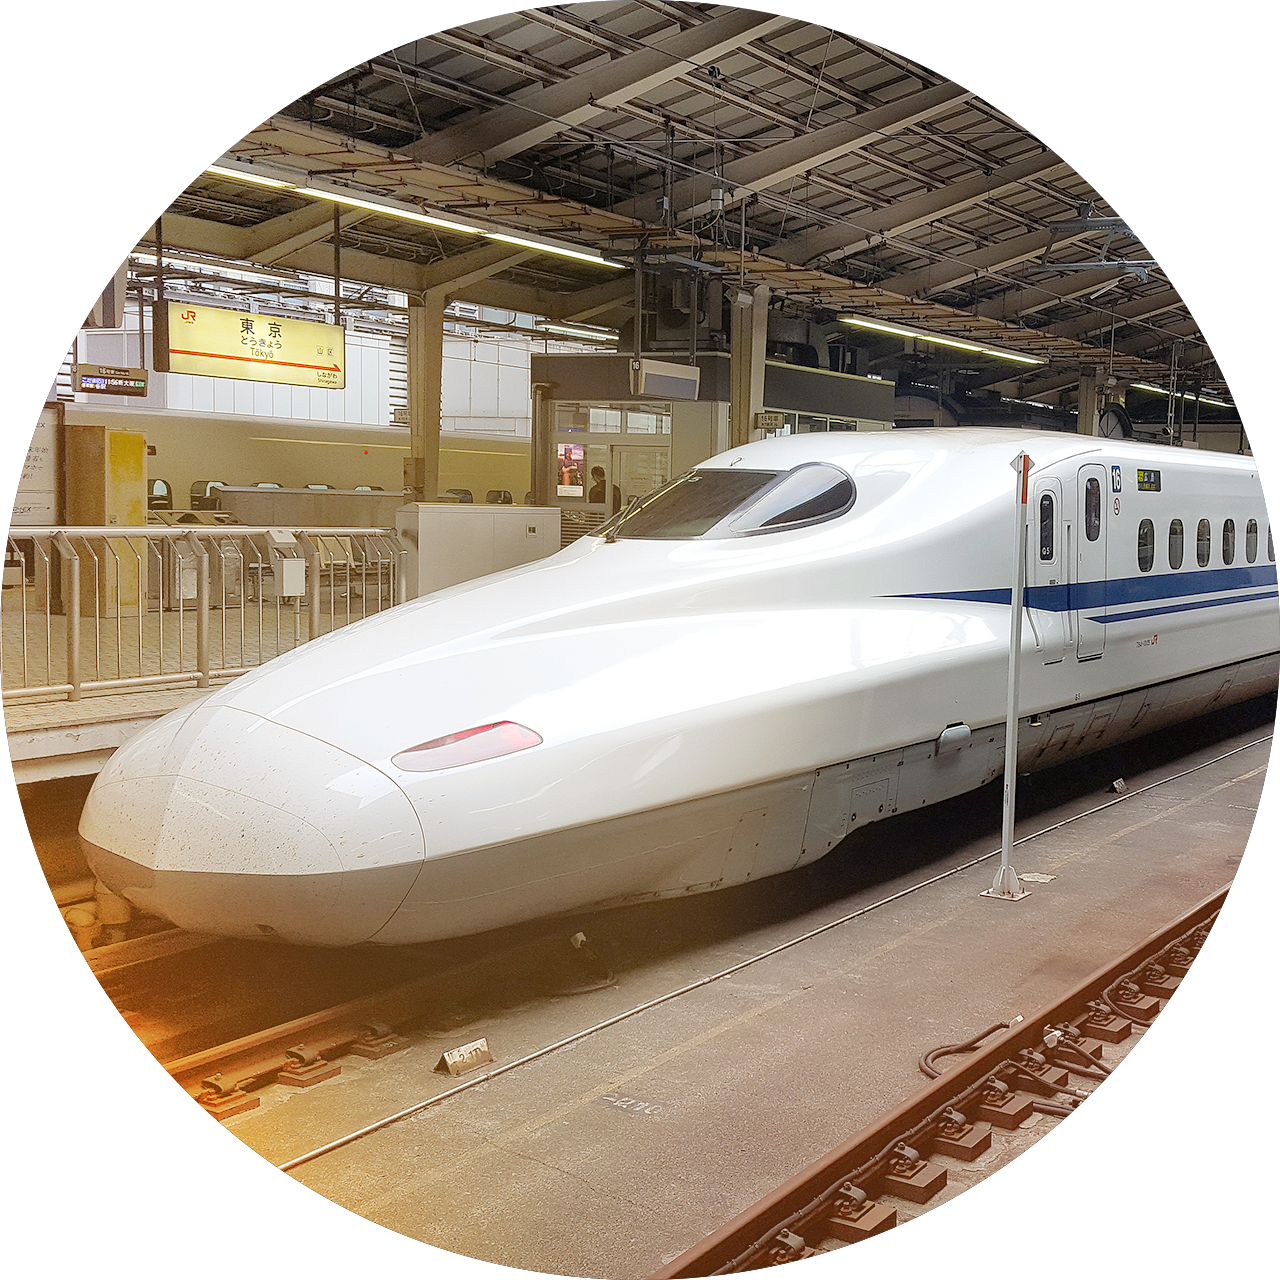 From South Korea to Japan, students will see the regions stunning high-speed bullet trains like the one pictured here.